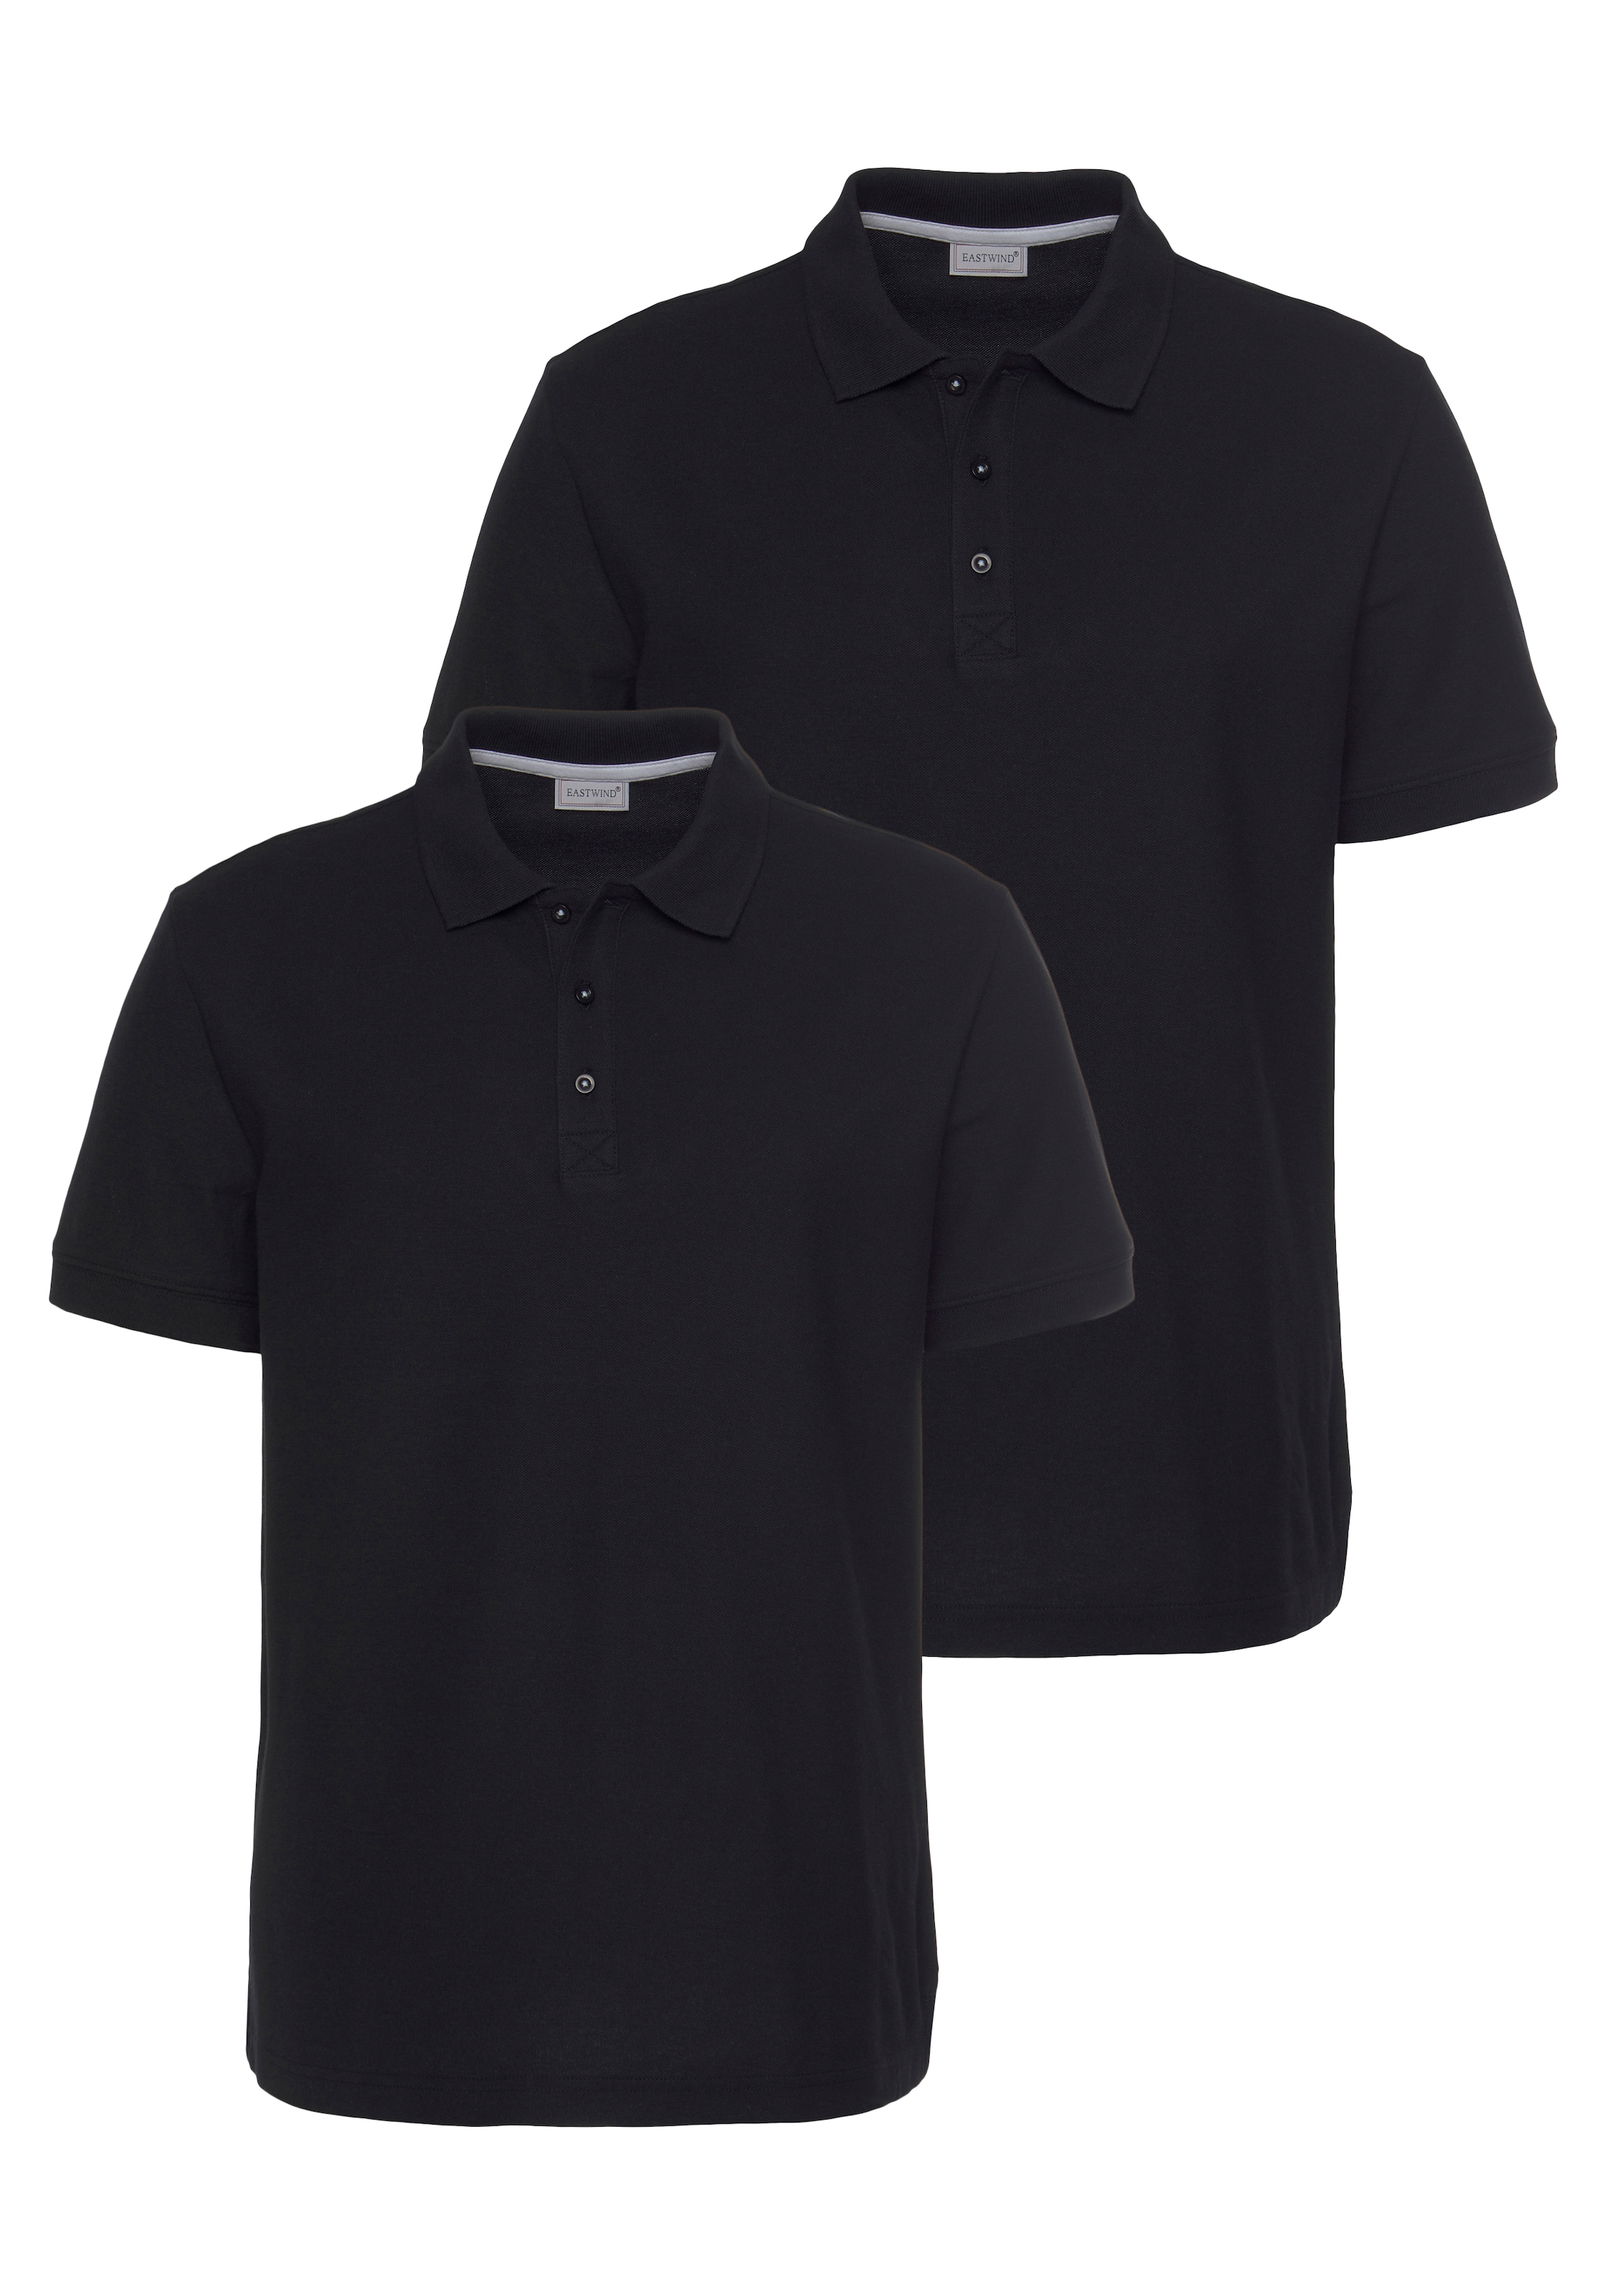 navy+white«, Poloshirt »Double Polo, bei (2er-Pack) Eastwind Pack